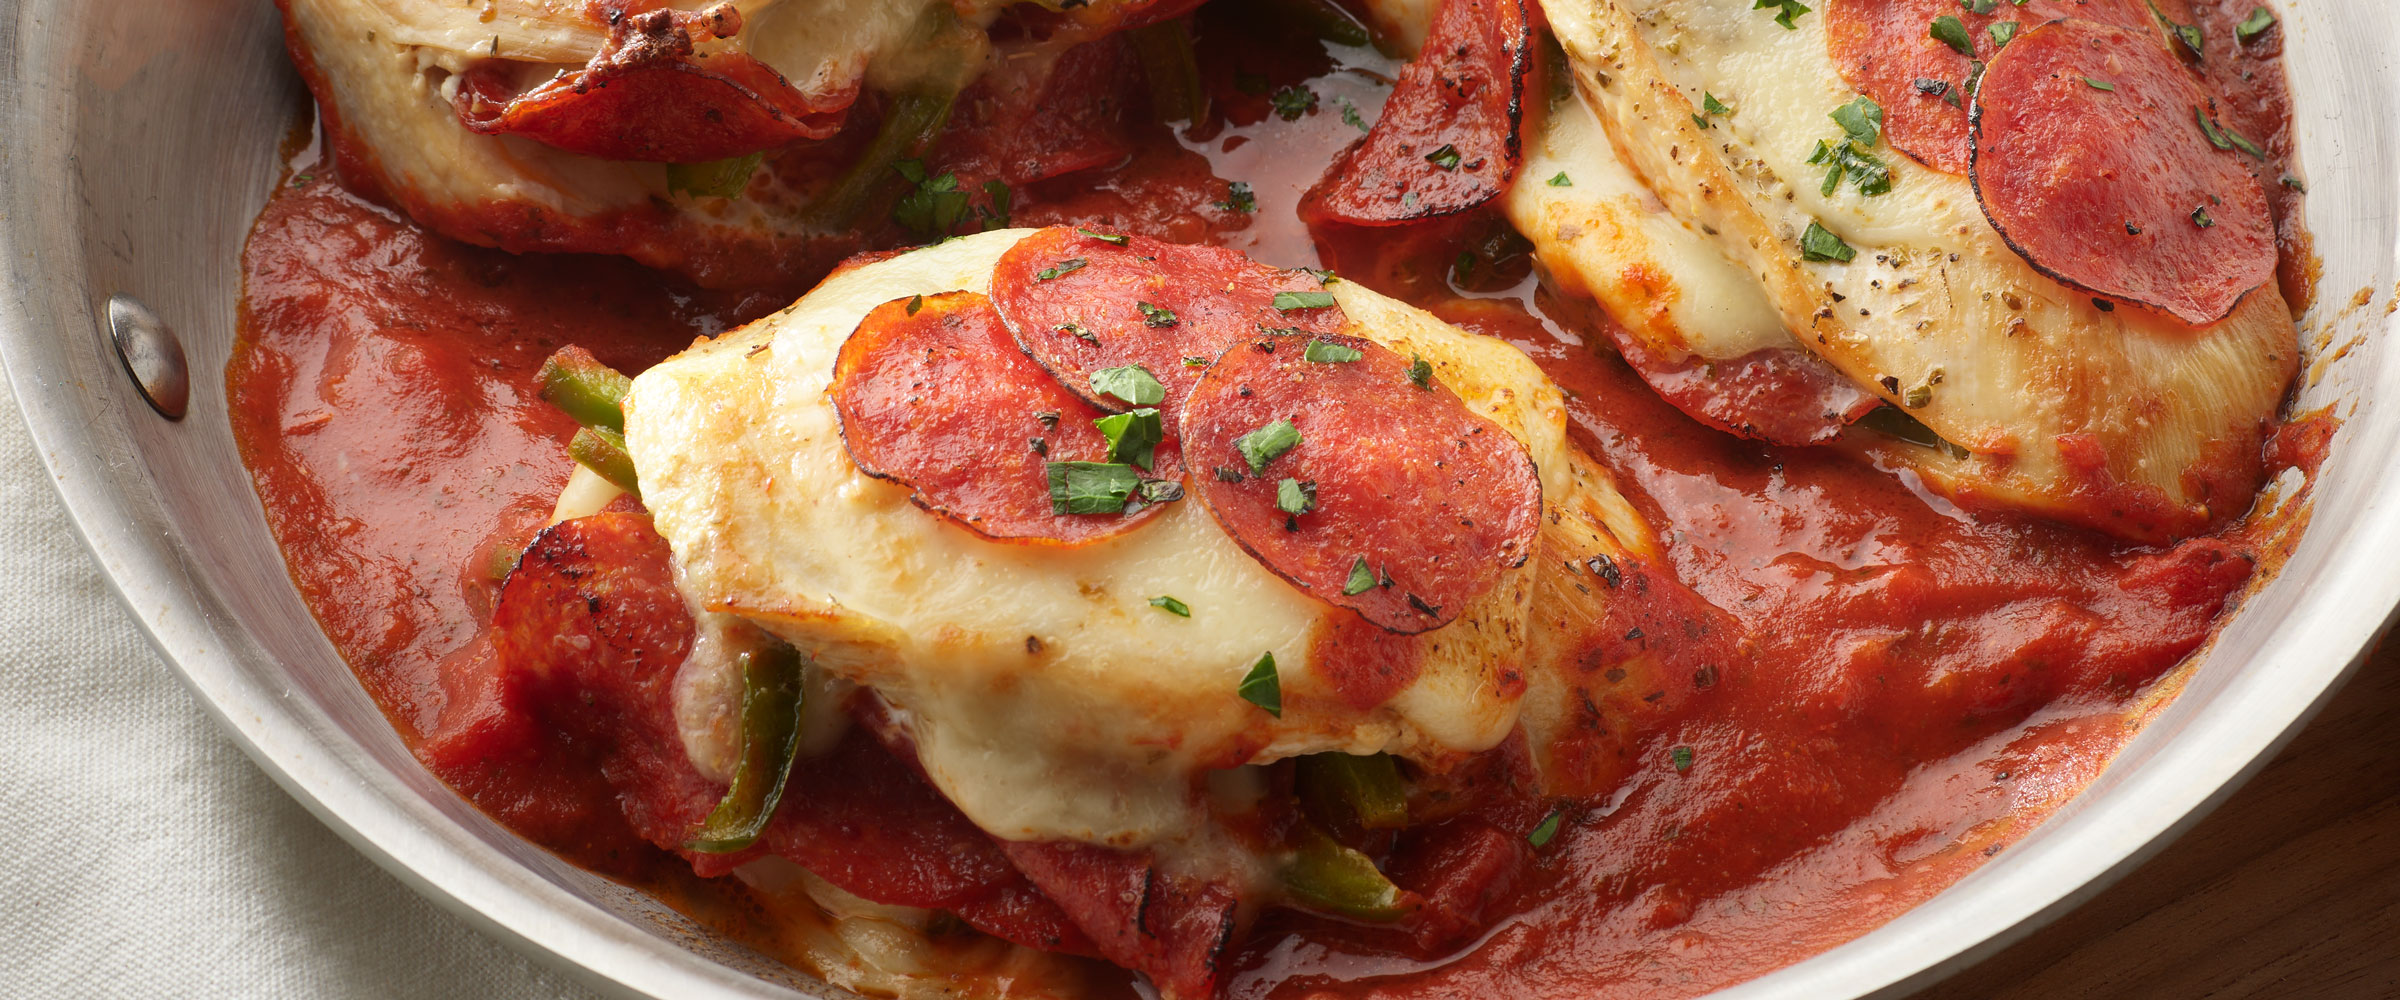 Pepperoni Stuffed Chicken with sauce in metal skillet